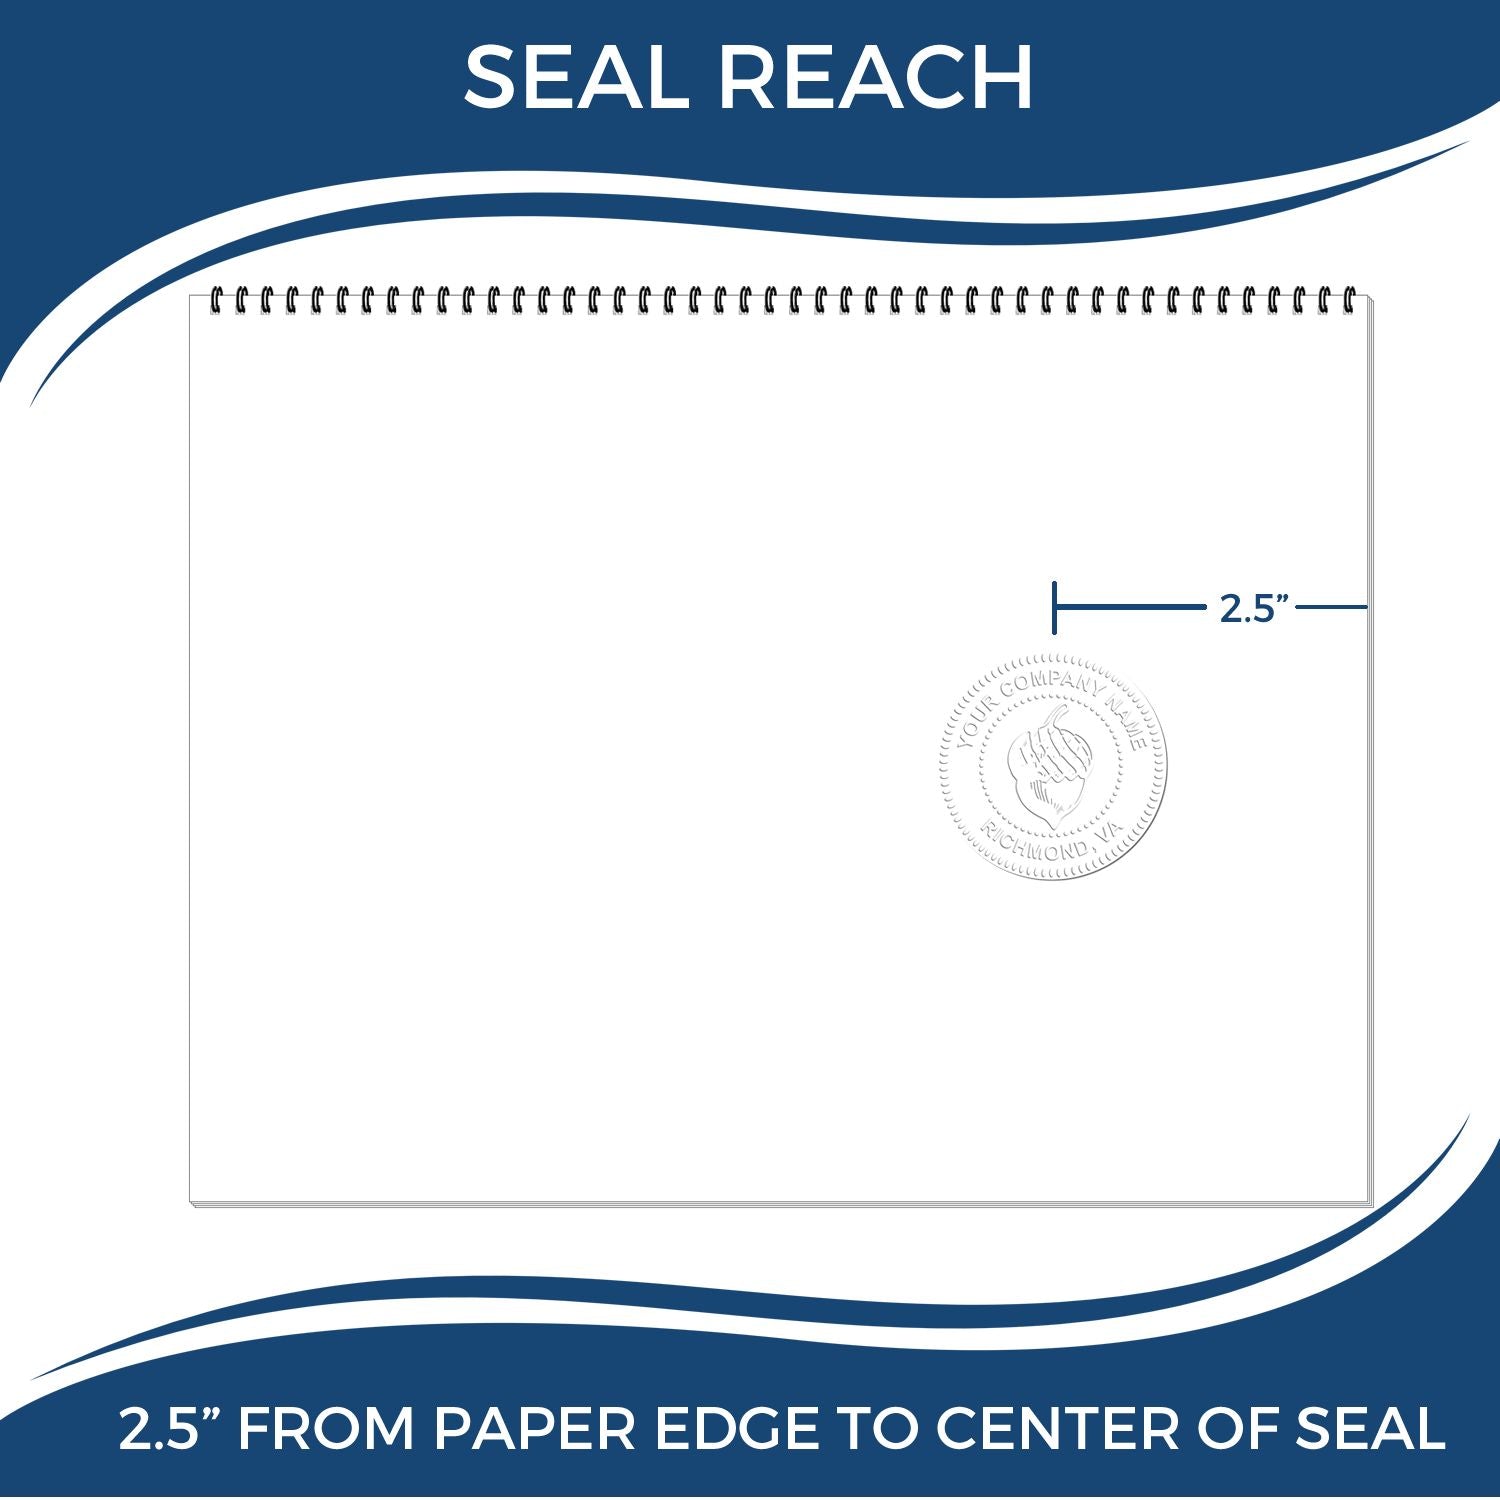 An infographic showing the seal reach which is represented by a ruler and a miniature seal image of the Long Reach Arizona Geology Seal